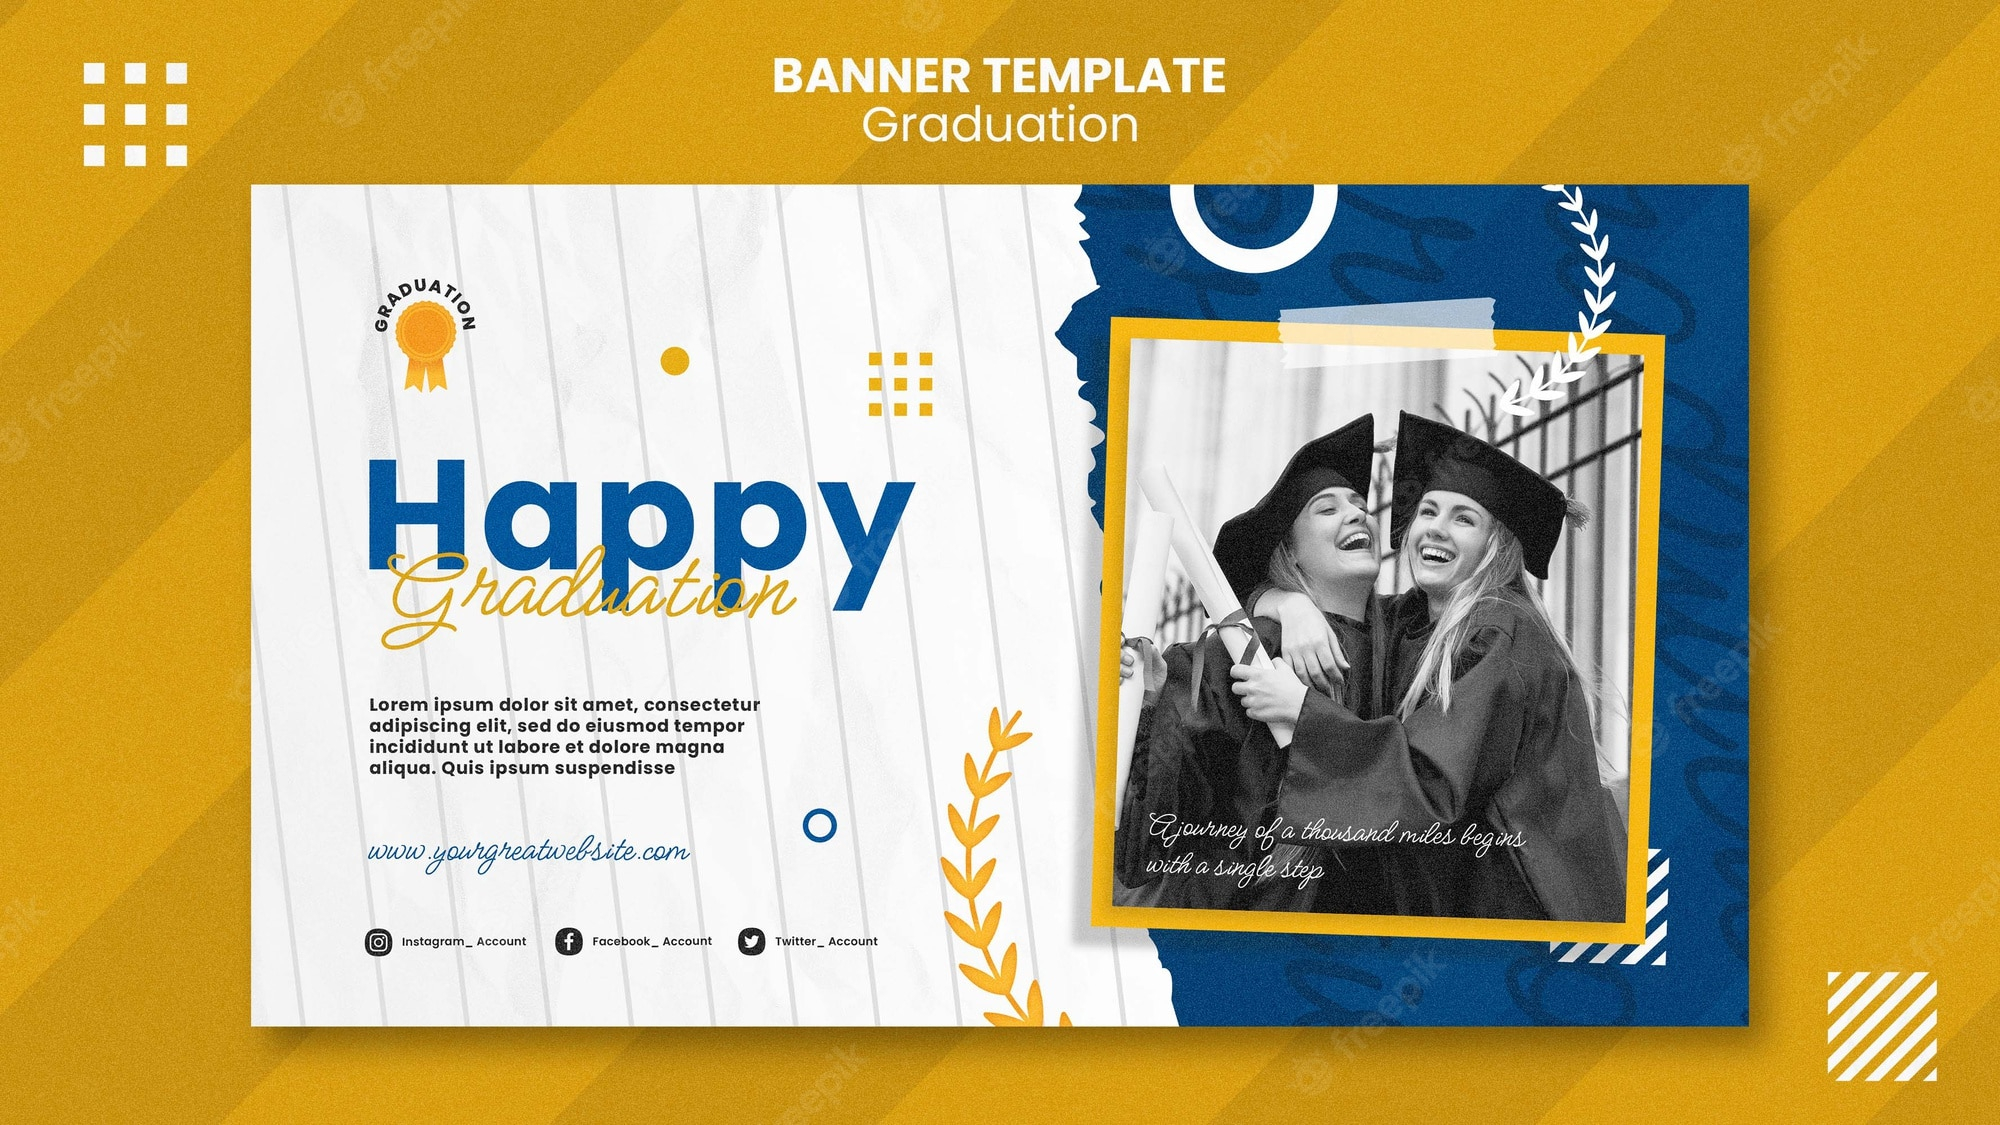 Graduation banner Images  Free Vectors, Stock Photos & PSD With Regard To Graduation Banner Template